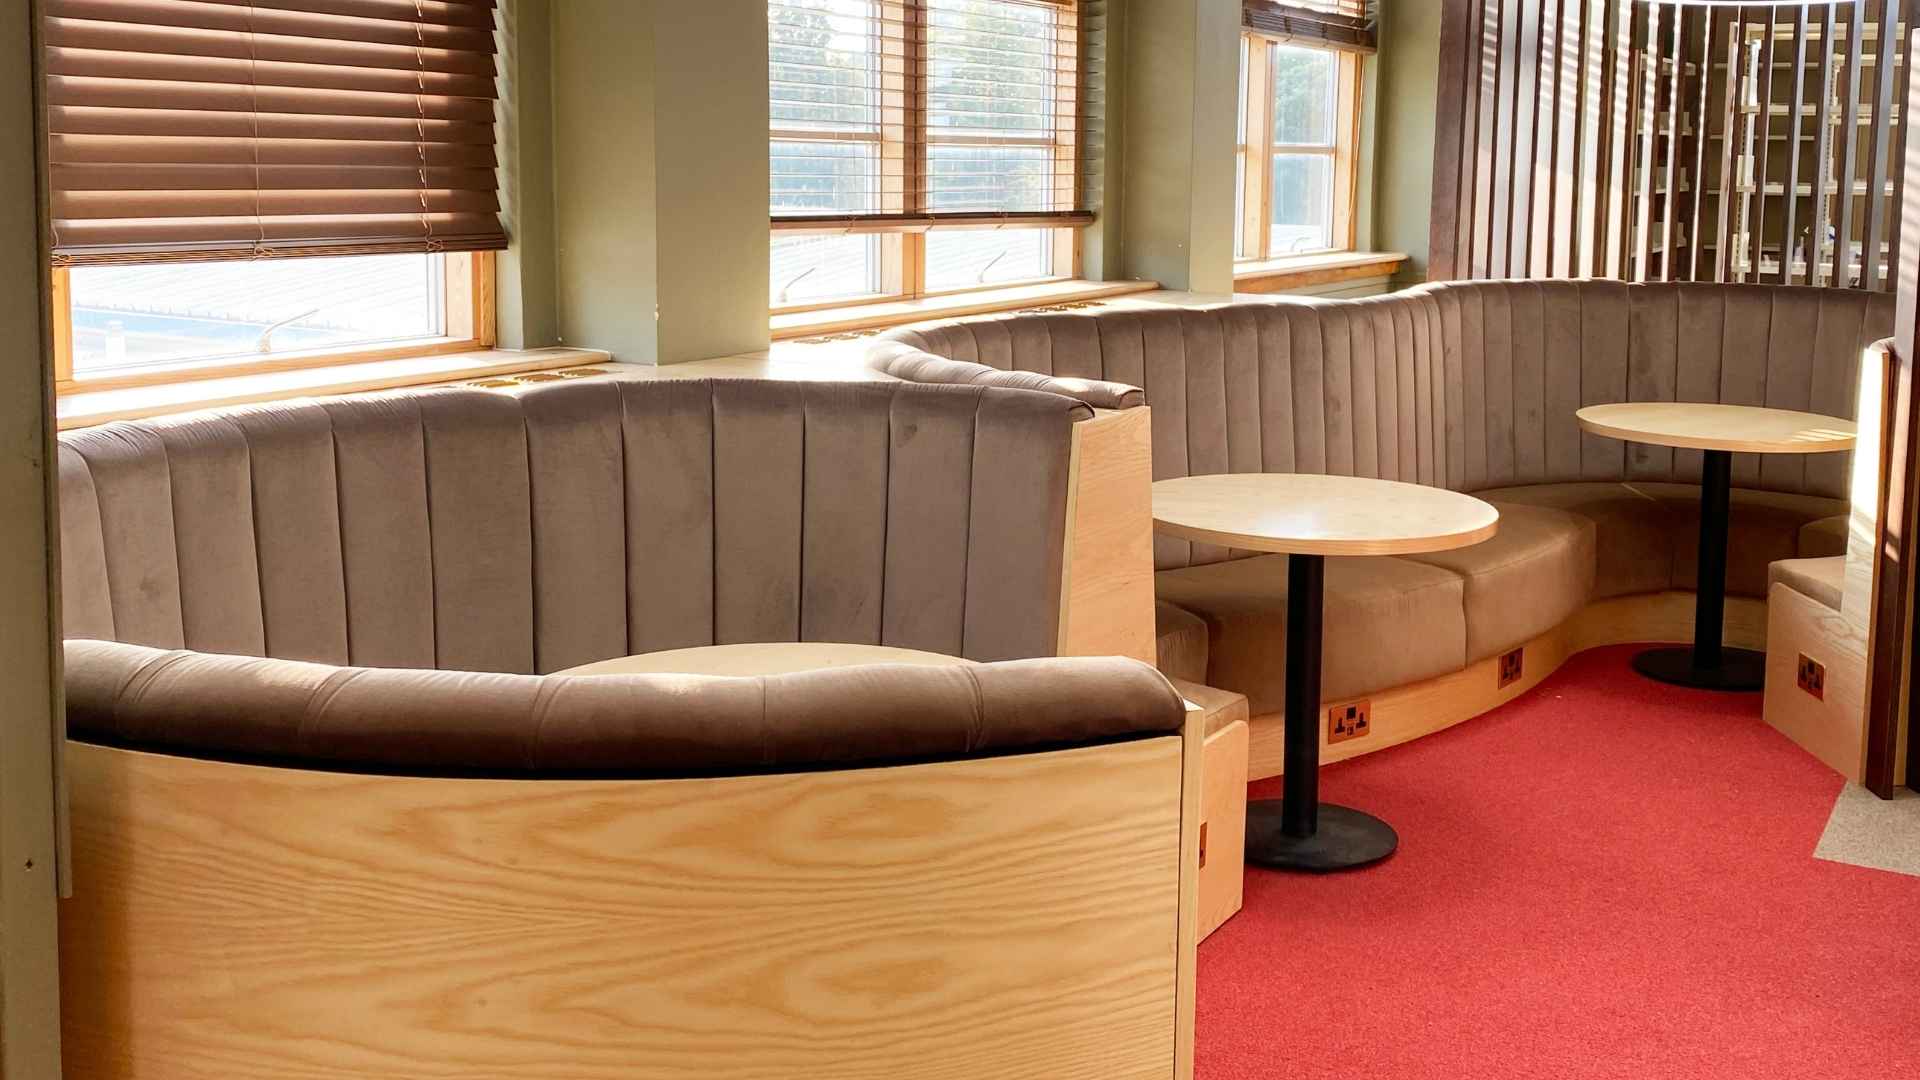 school banquette seating